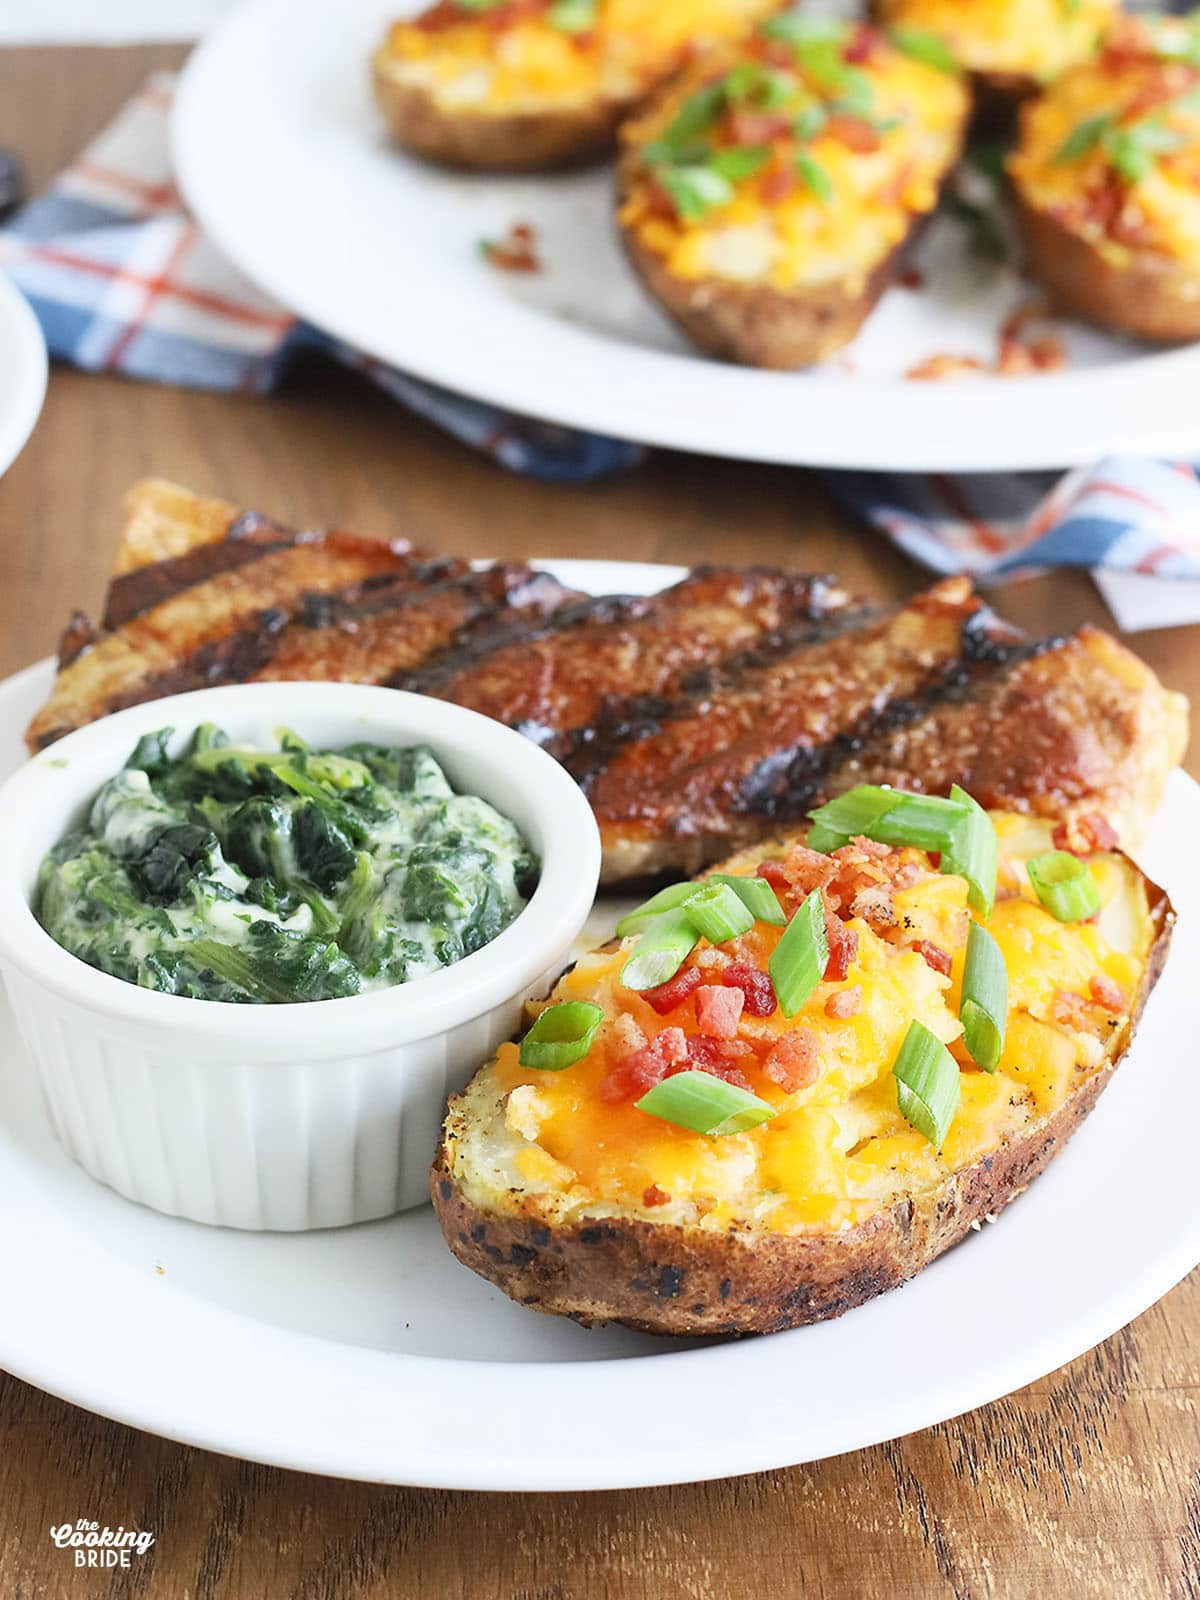 twice baked potato on a white plate with a grilled steak and ramekin of creamed spinach